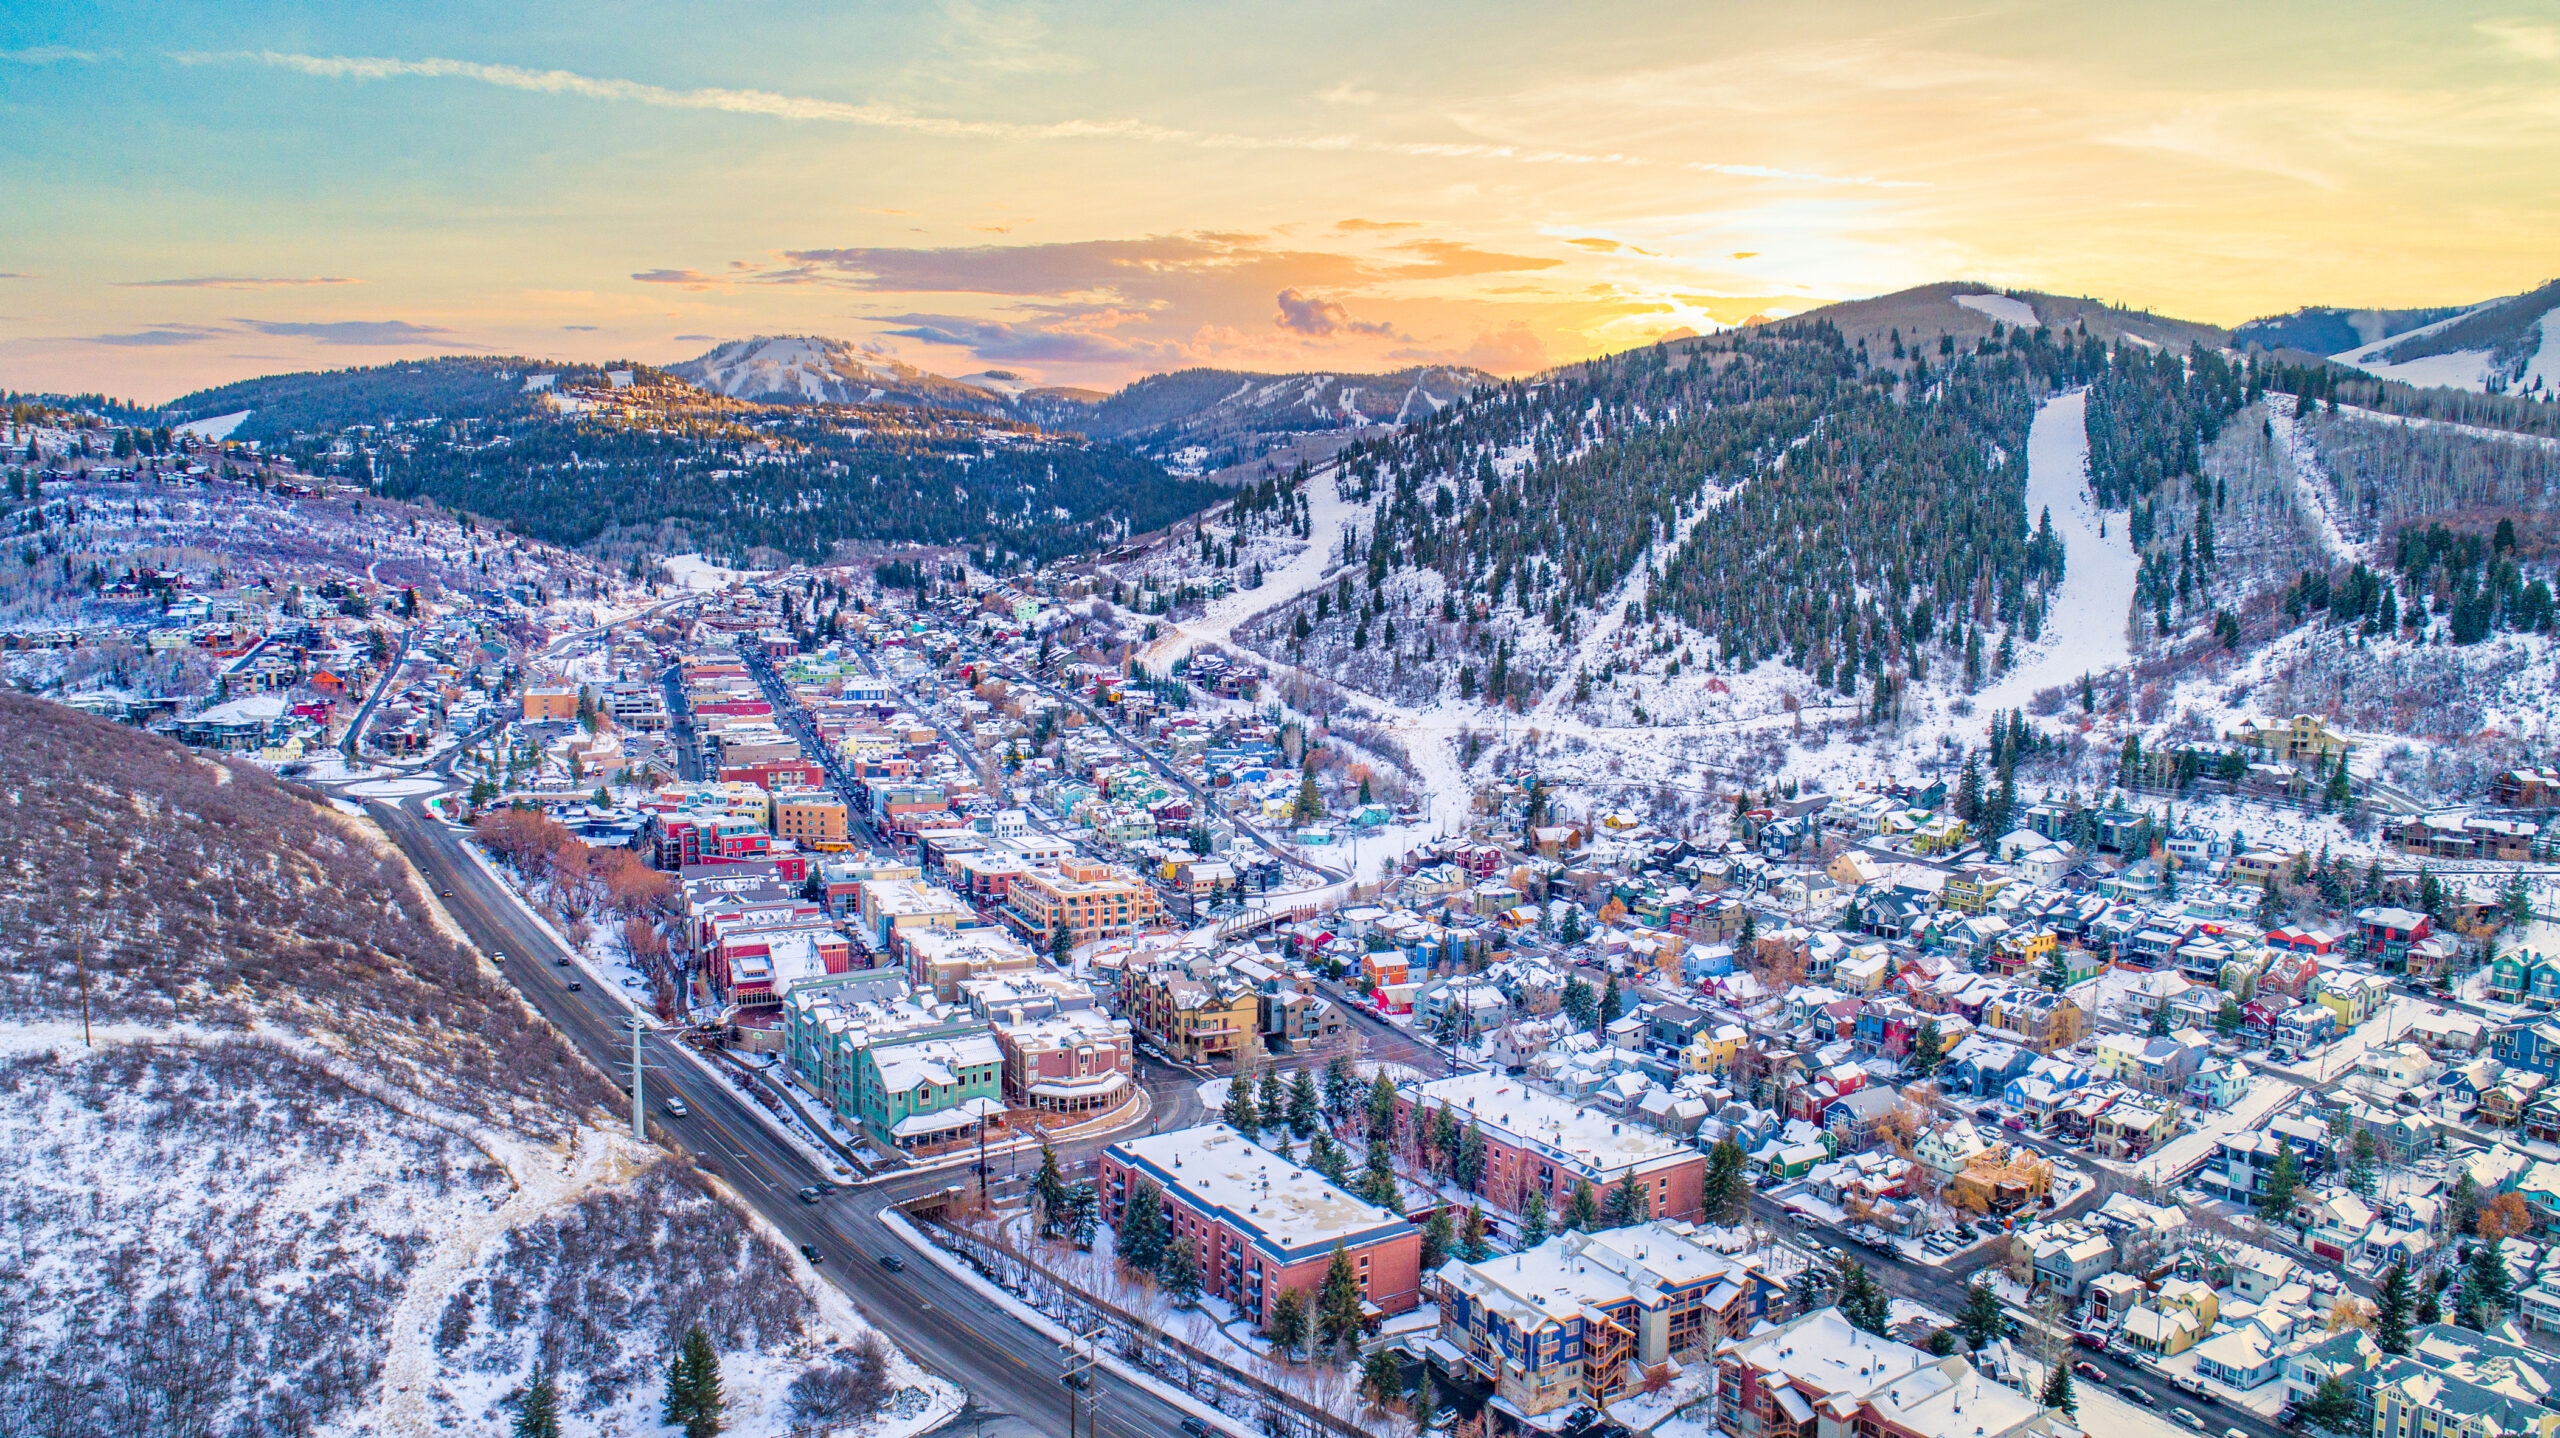 Park City, Utah, USA Downtown Aerial Photo in the Winter